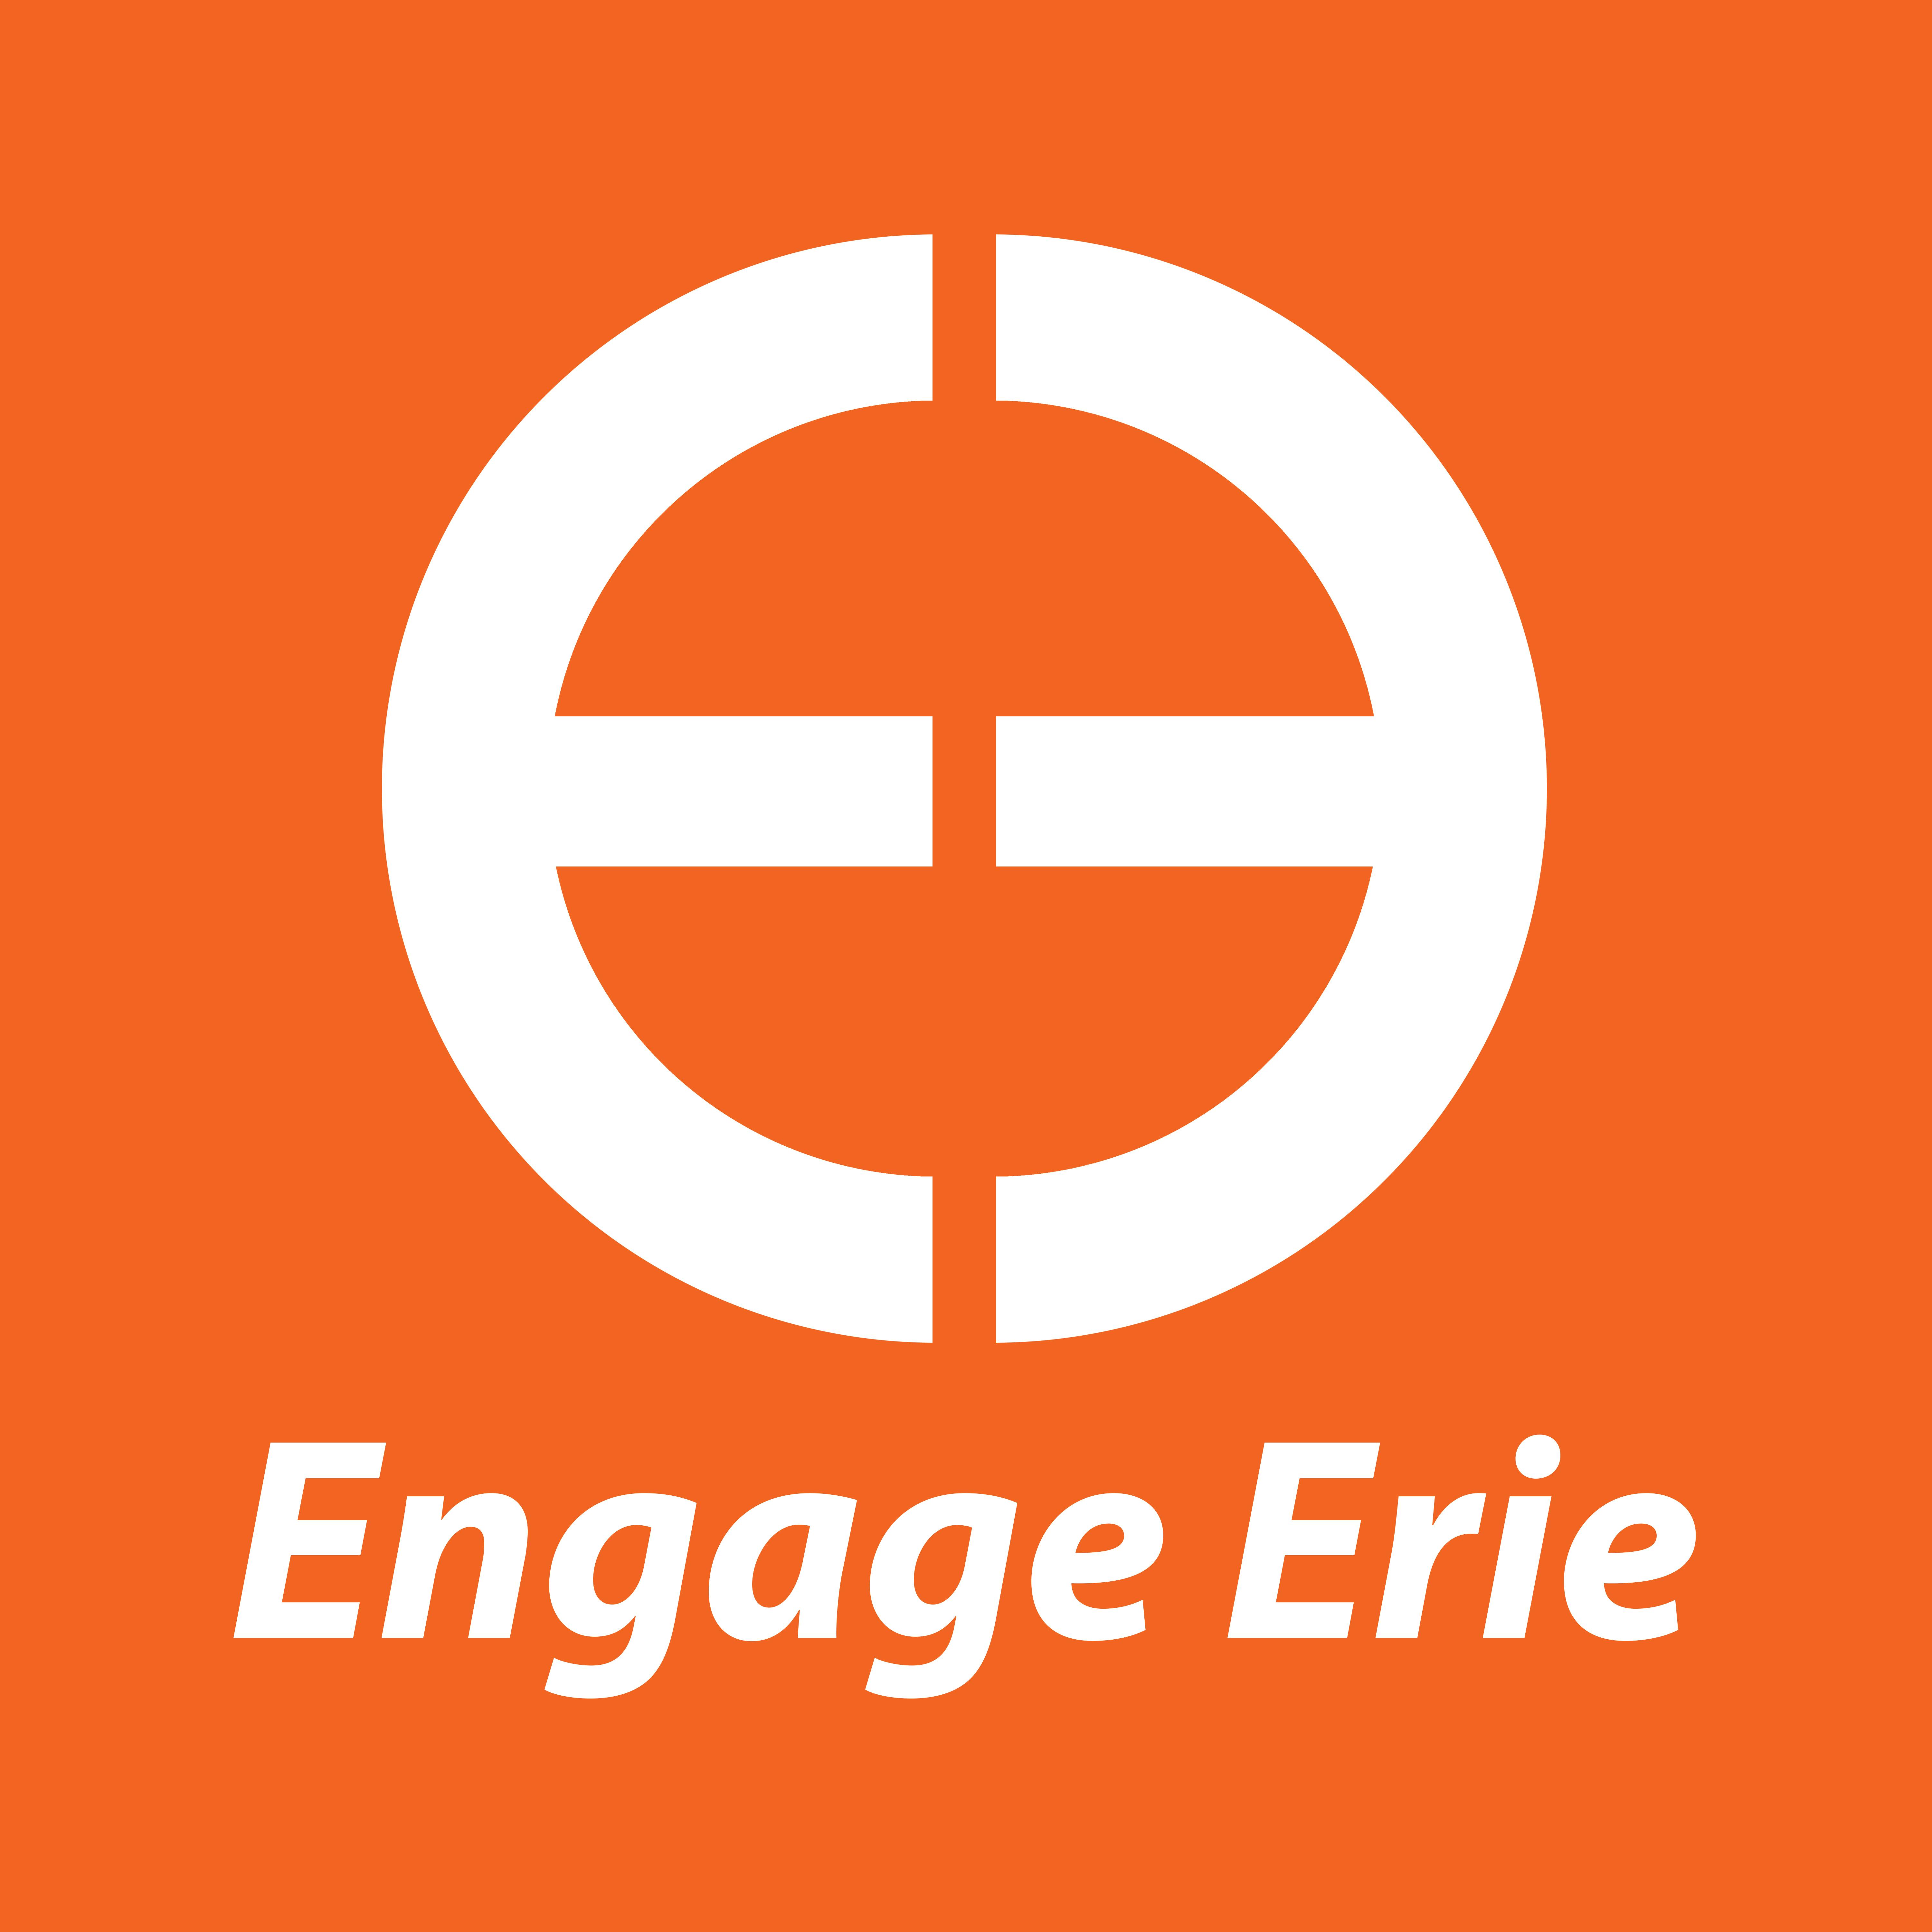 Engage Erie